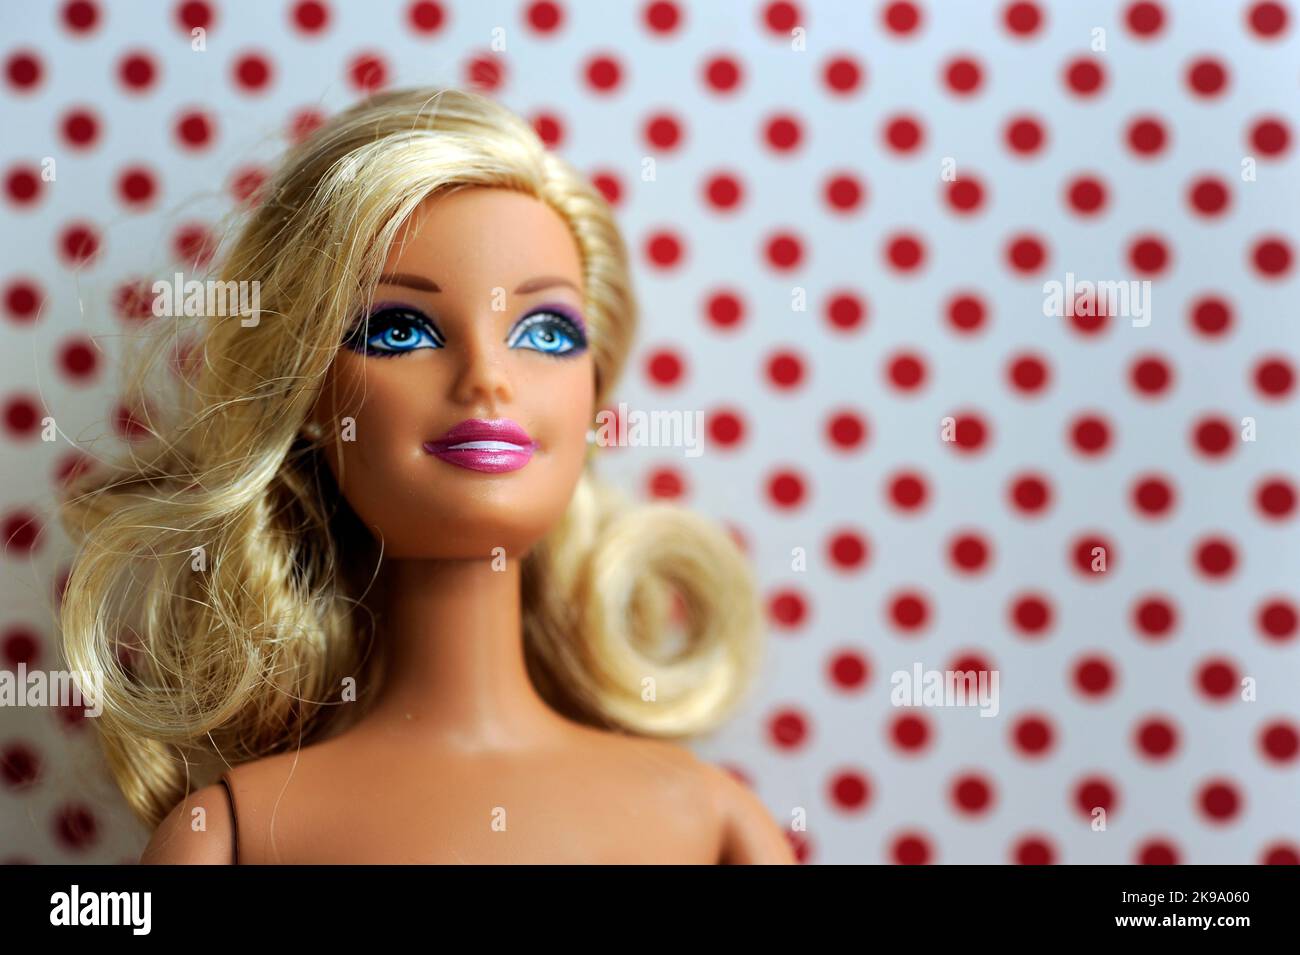 blonde Barbie doll face Stock Photo